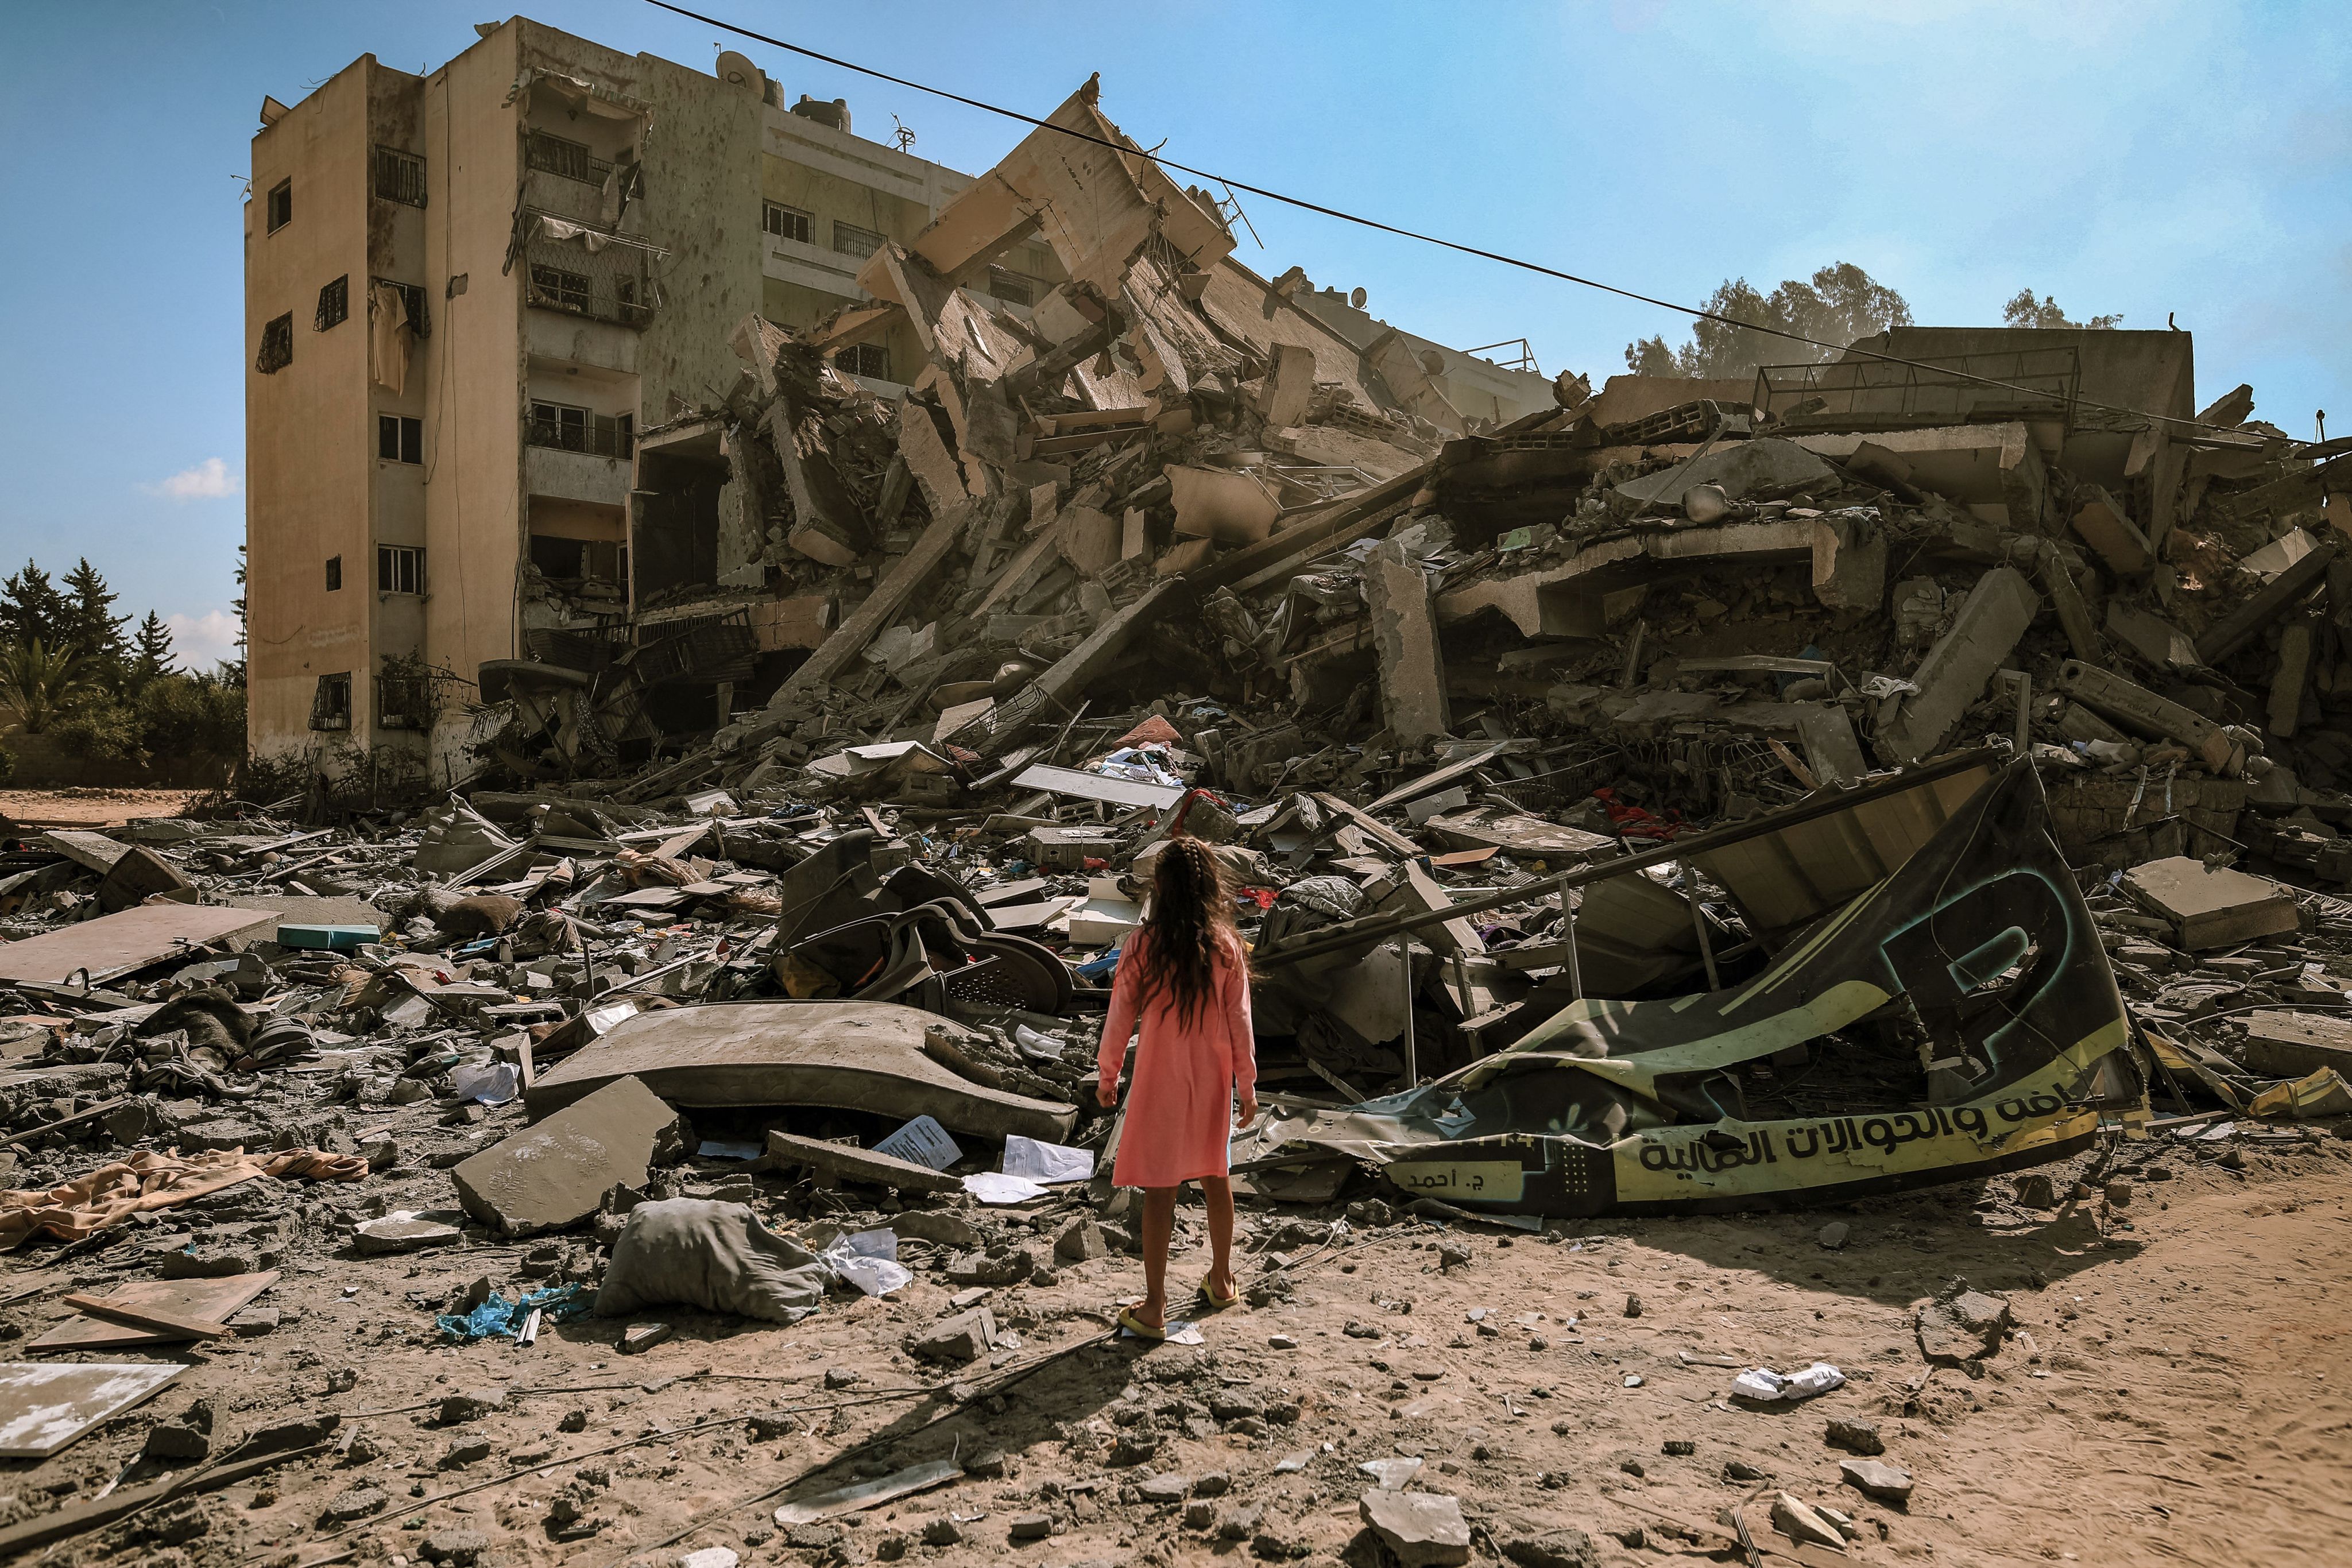 A young girl in Gaza stands amidst building rubble